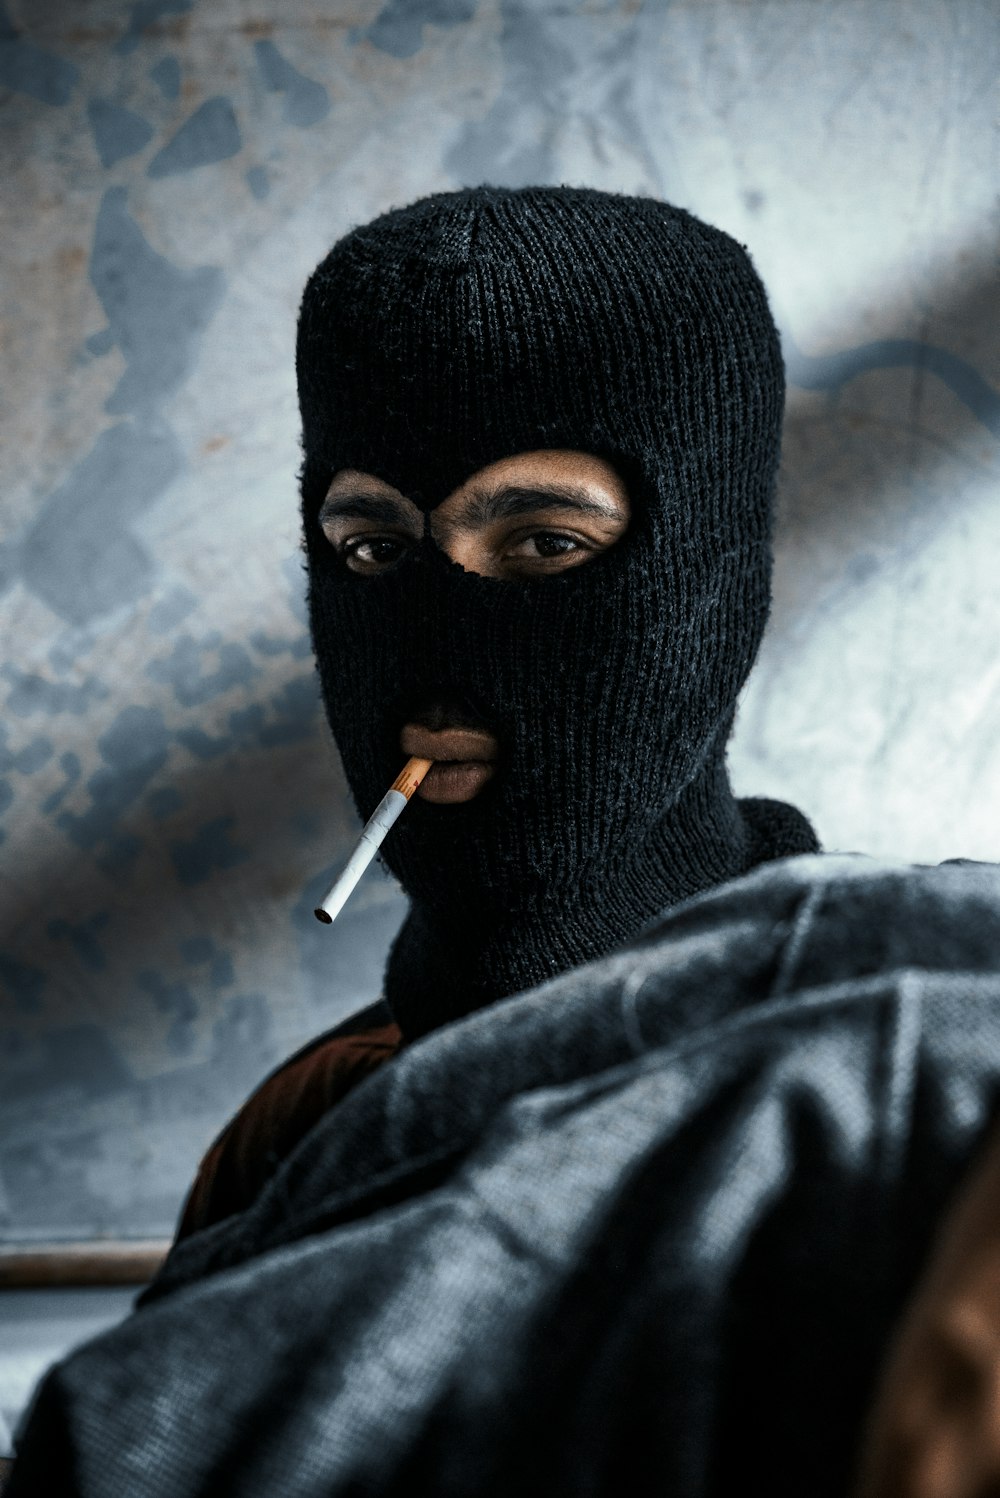 a man in a black mask smoking a cigarette